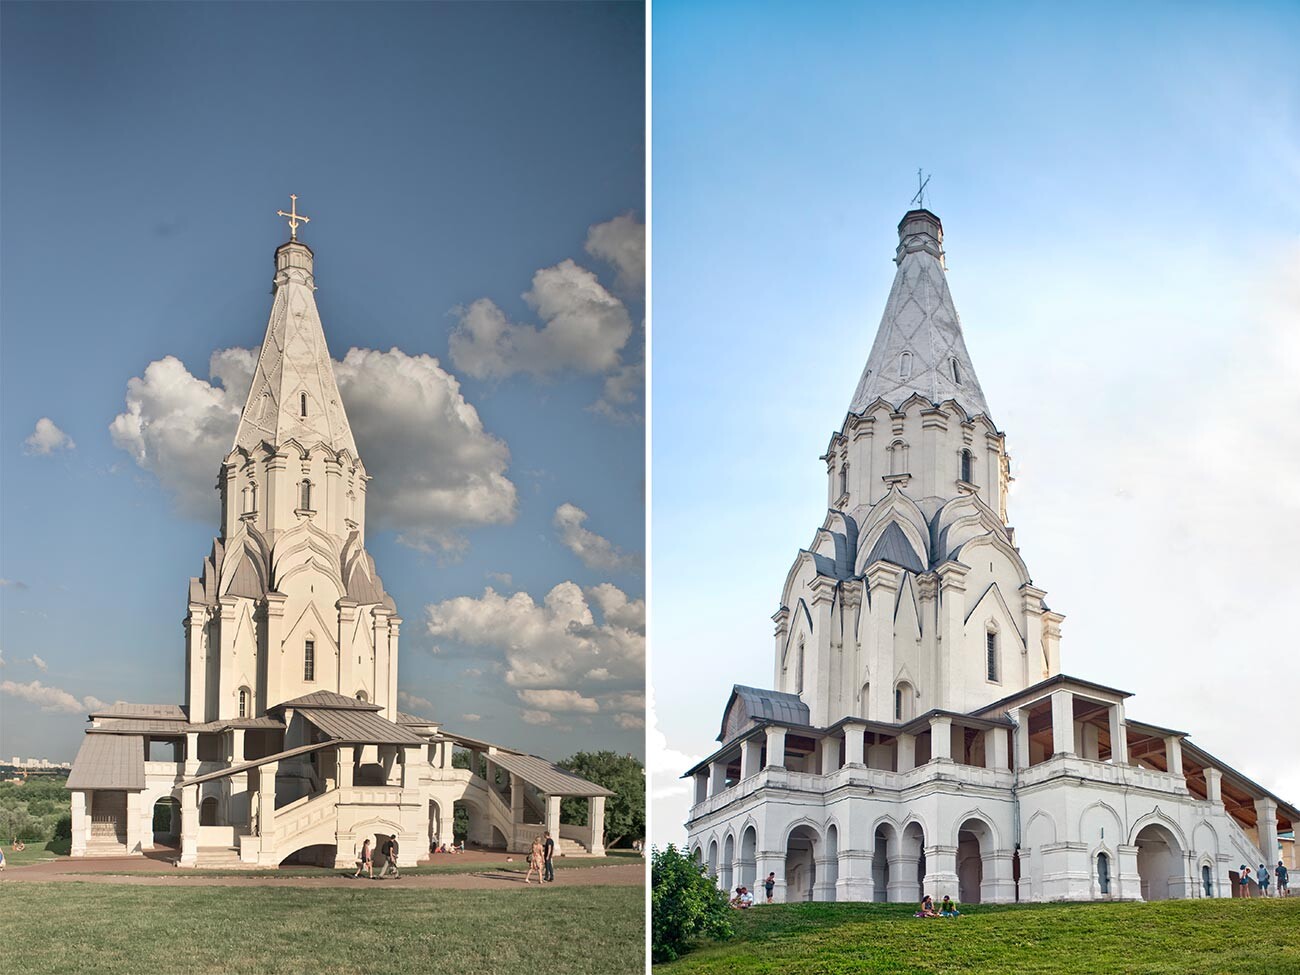 Left: Church of the Ascension. West view. June 8, 2014.
Rigth: Northeast view. June 8, 2014